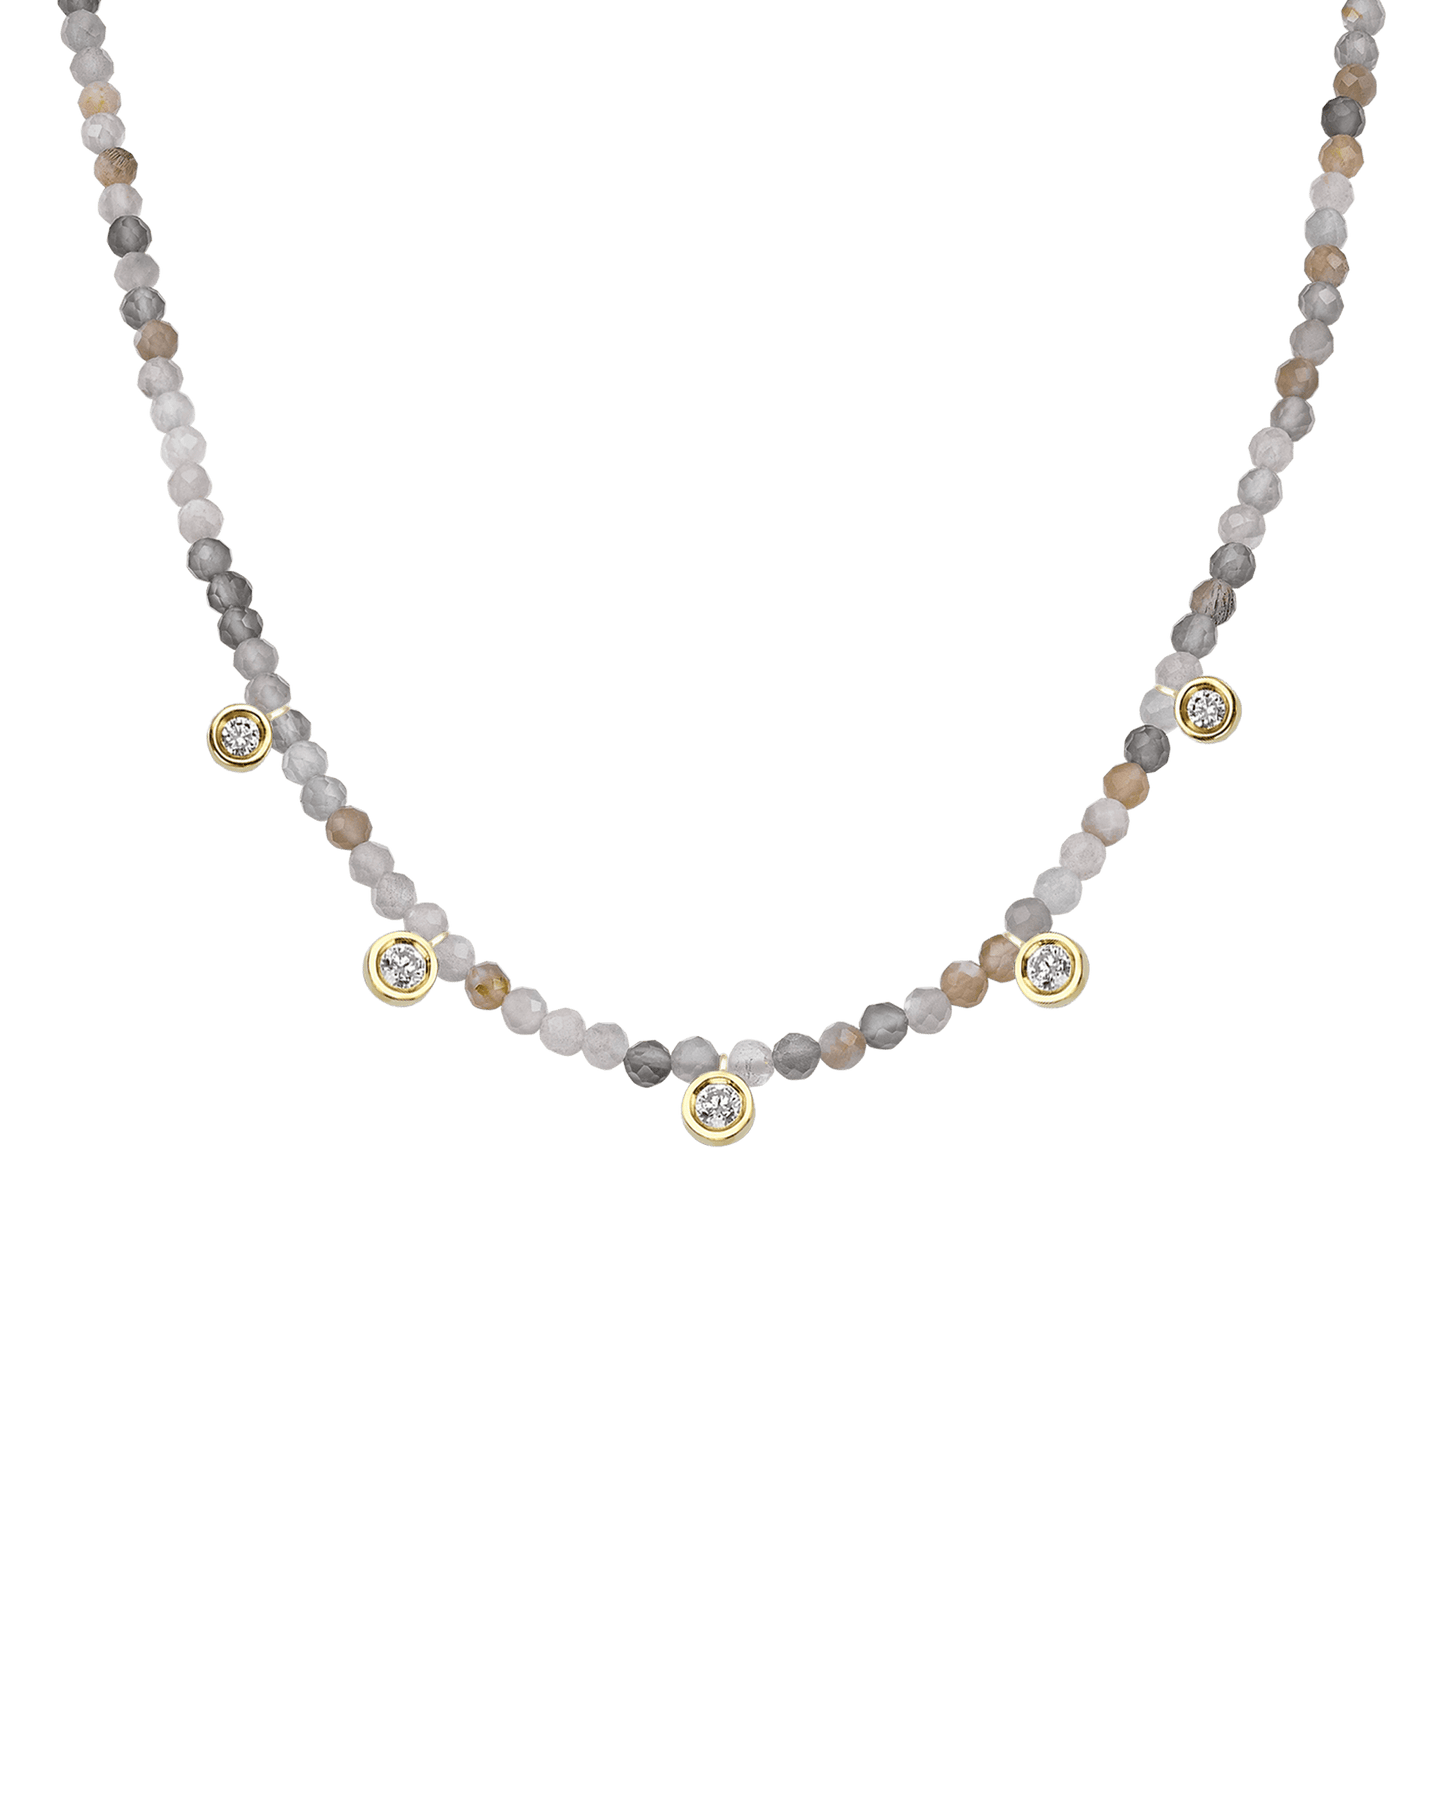 Turquoise Gemstone & Five diamonds Necklace - 14K White Gold Necklaces magal-dev 